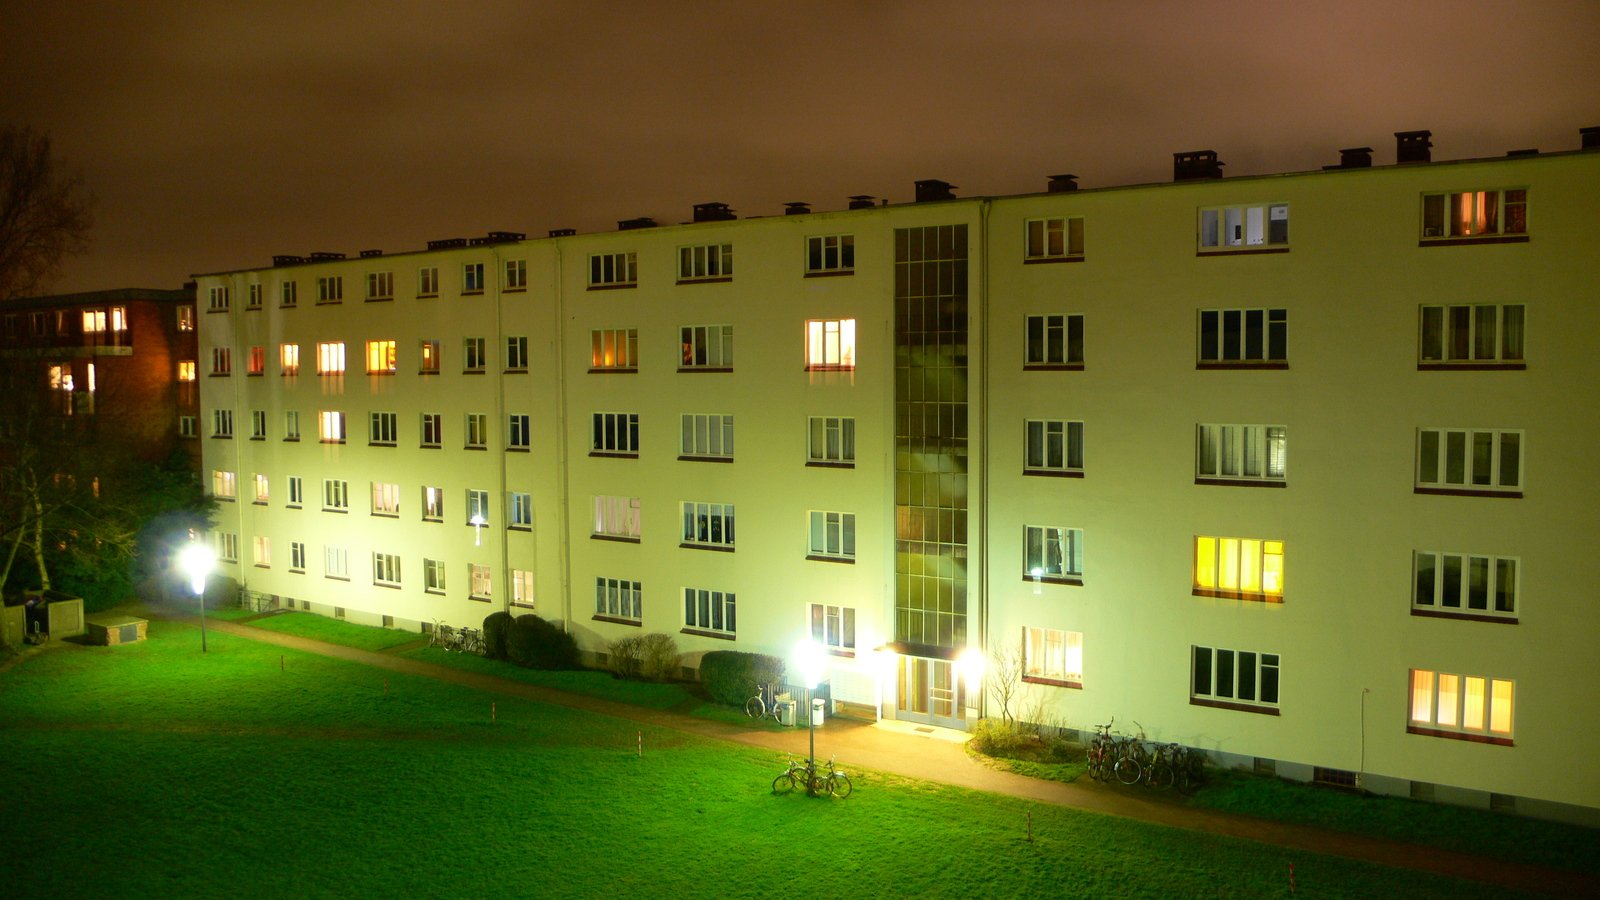 a lawn area with a building and a clock at night